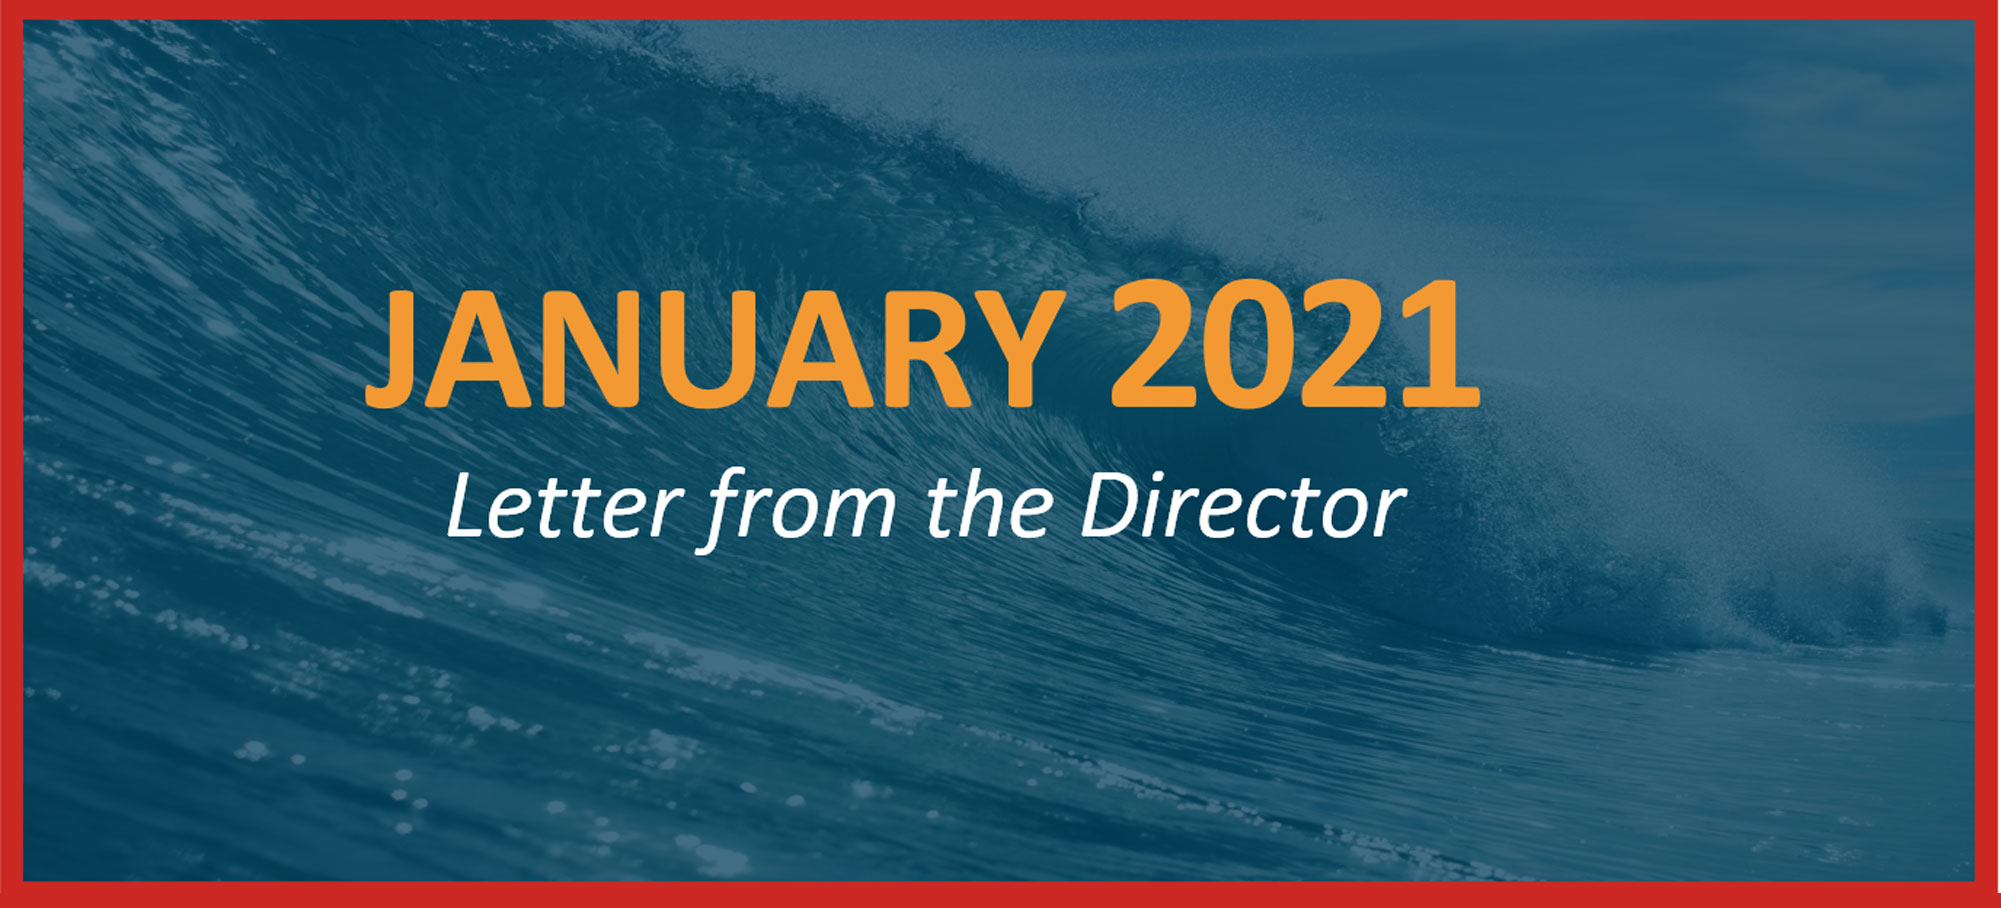 January 2021 - Letter from the Director